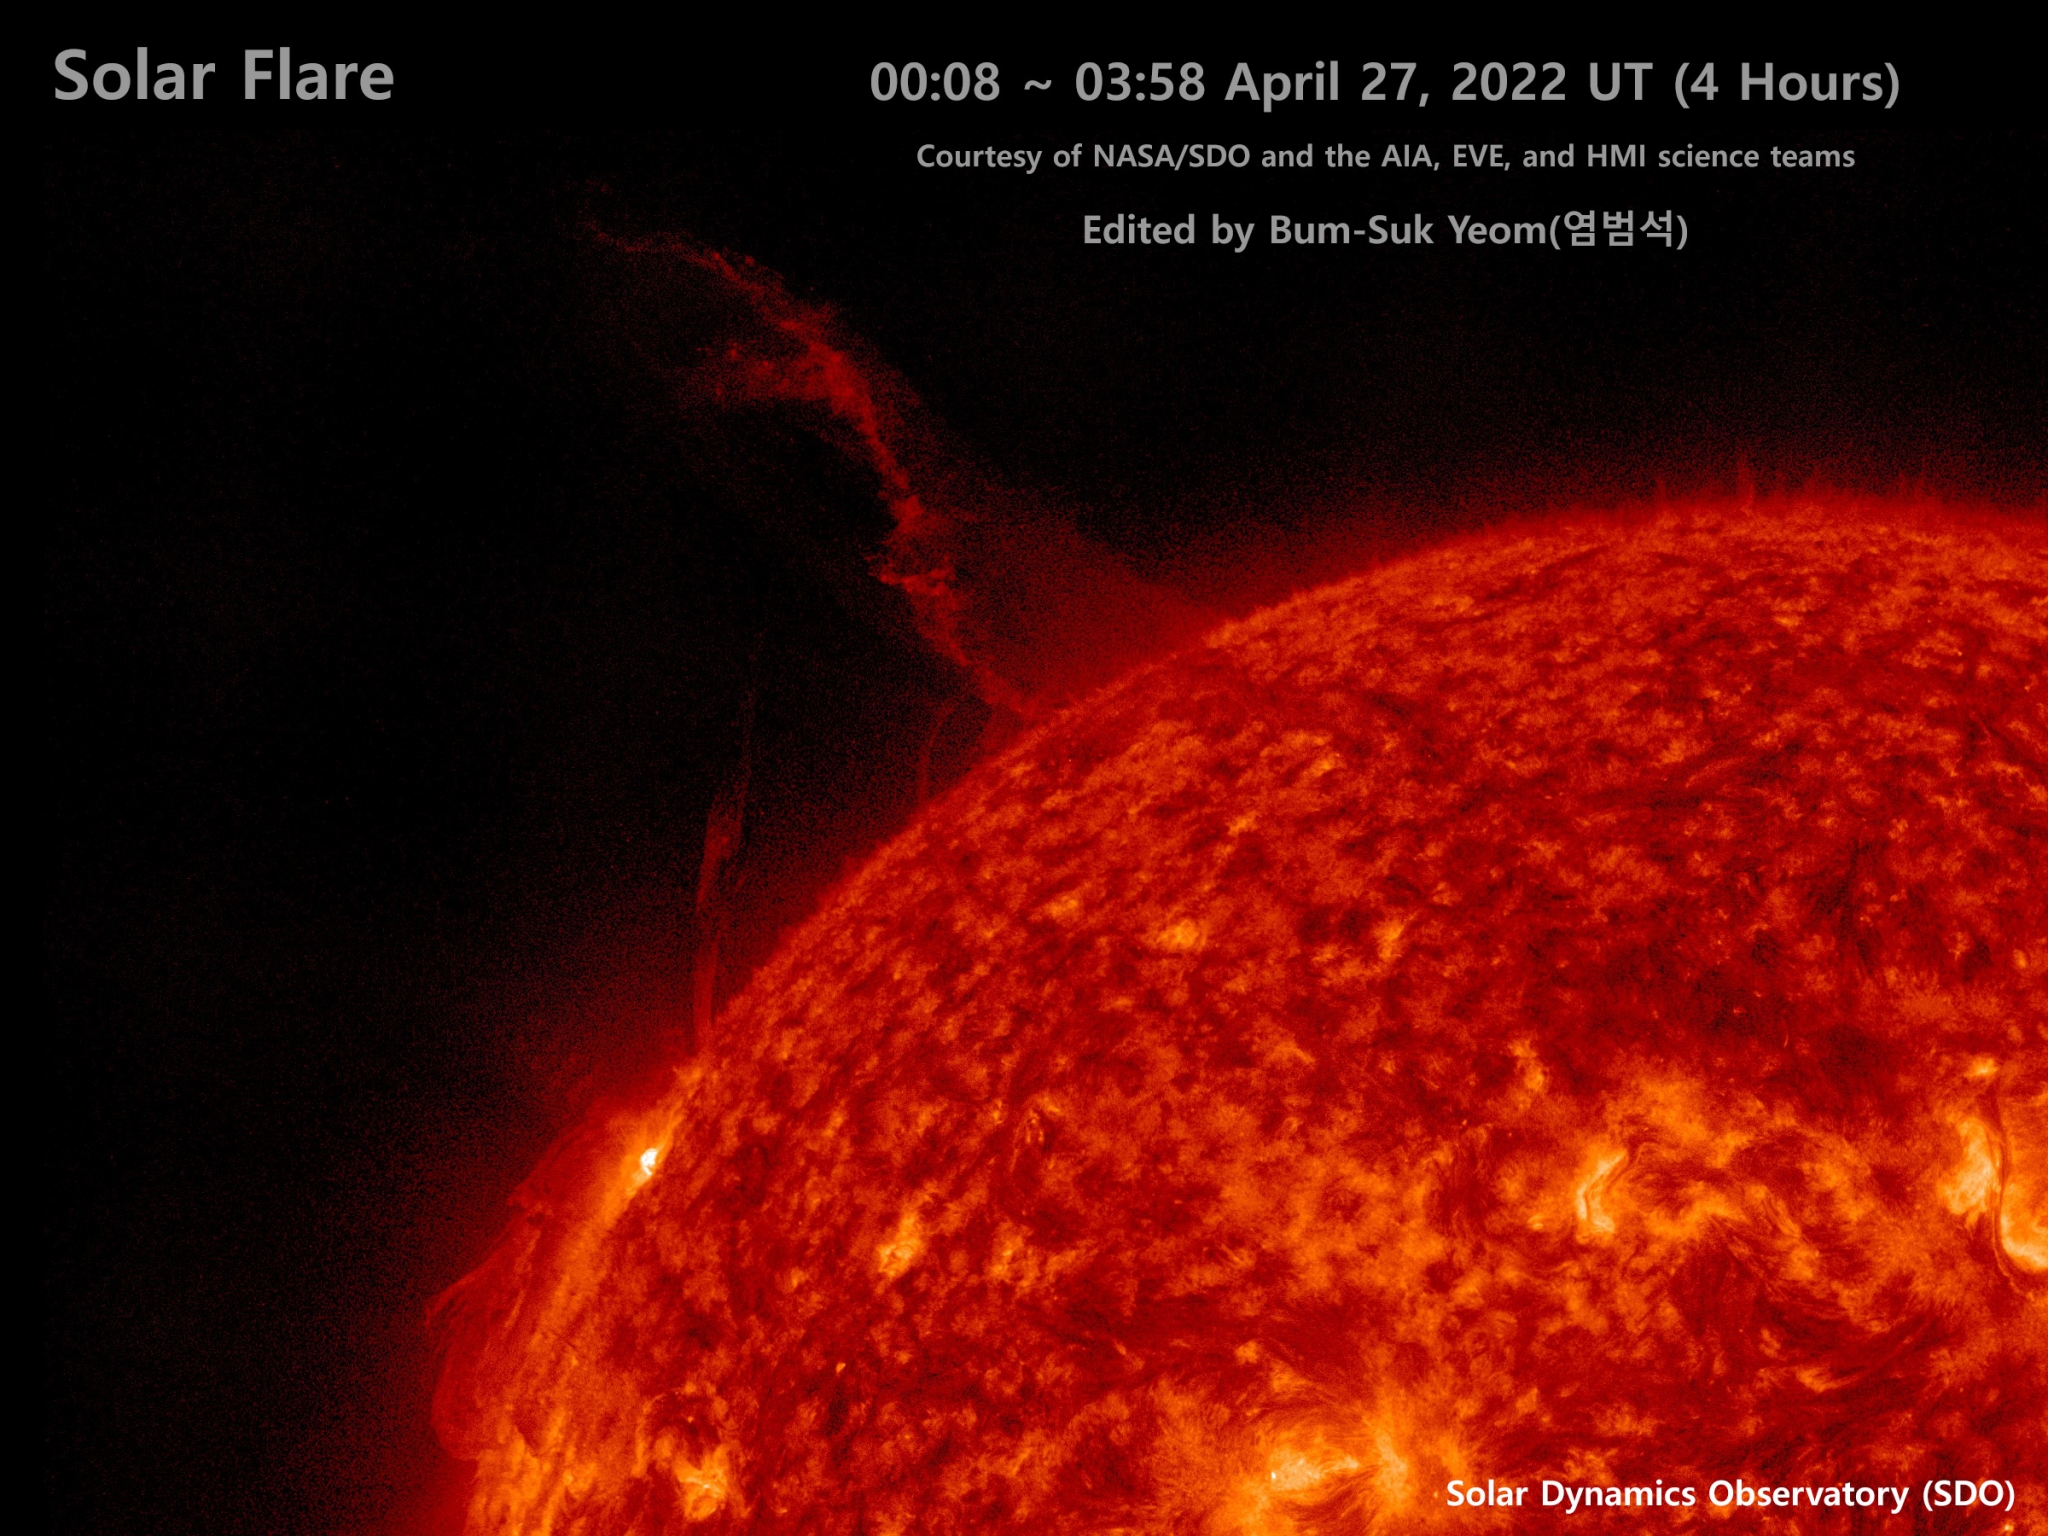 astronews_20220428_solar_flare_cover_bsyeom